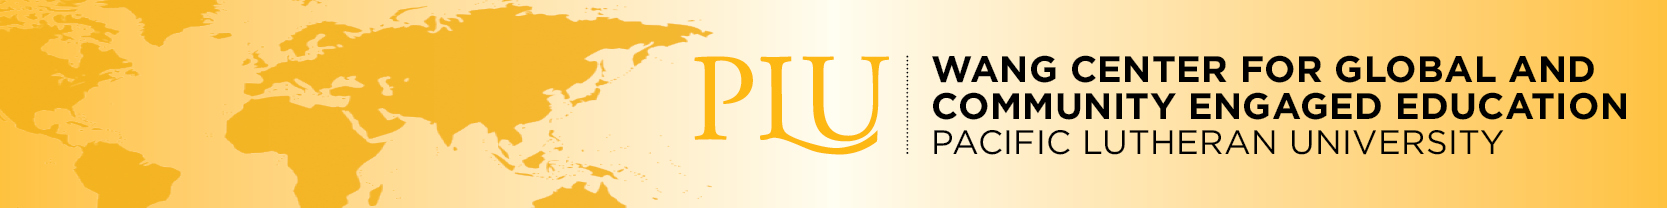 Wang Center for Global Education - Pacific Lutheran University